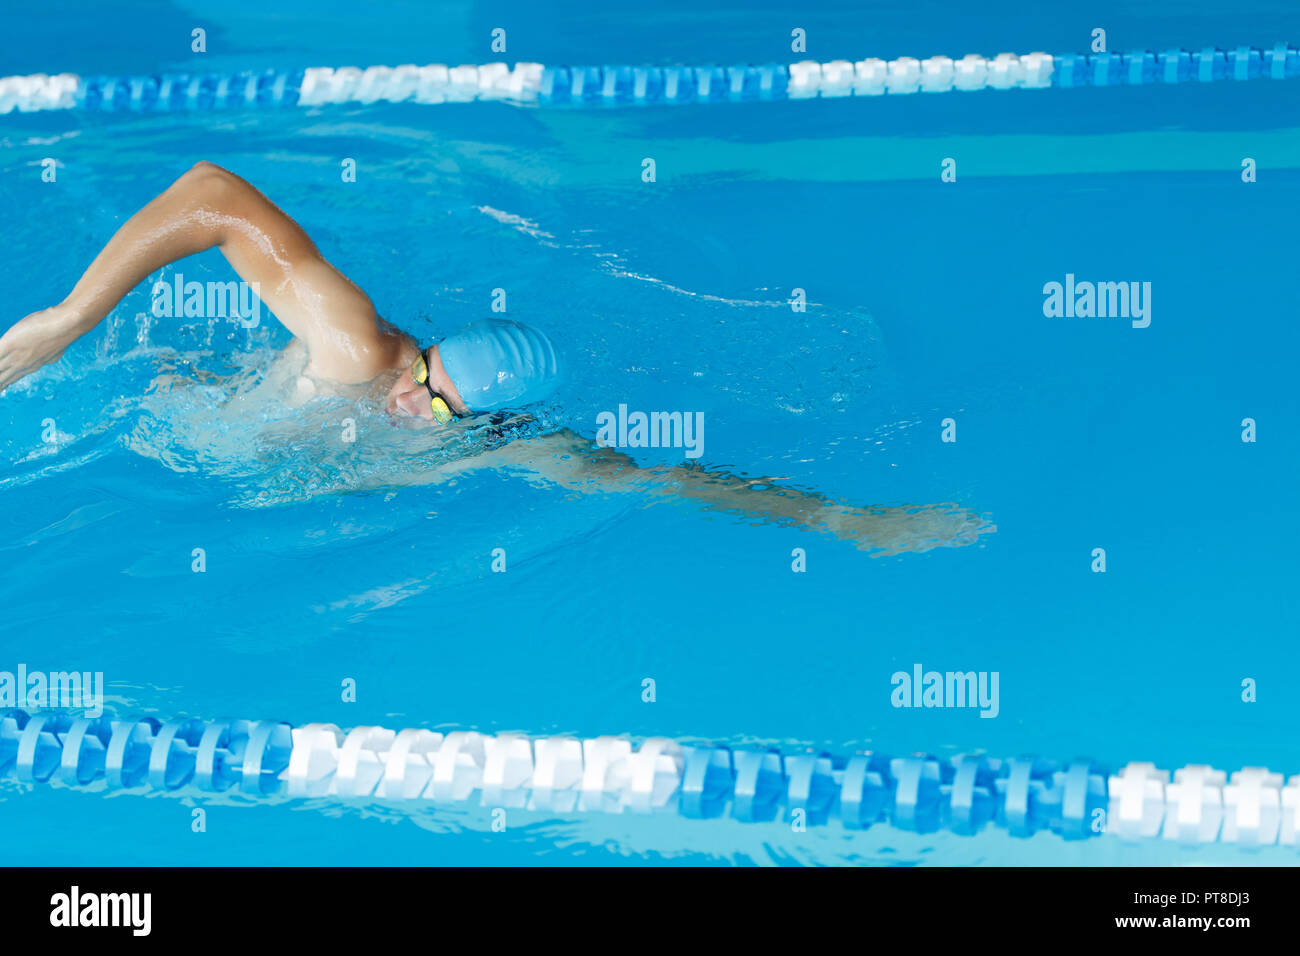 professional freestyle swimmer in swimming pool Stock Photo